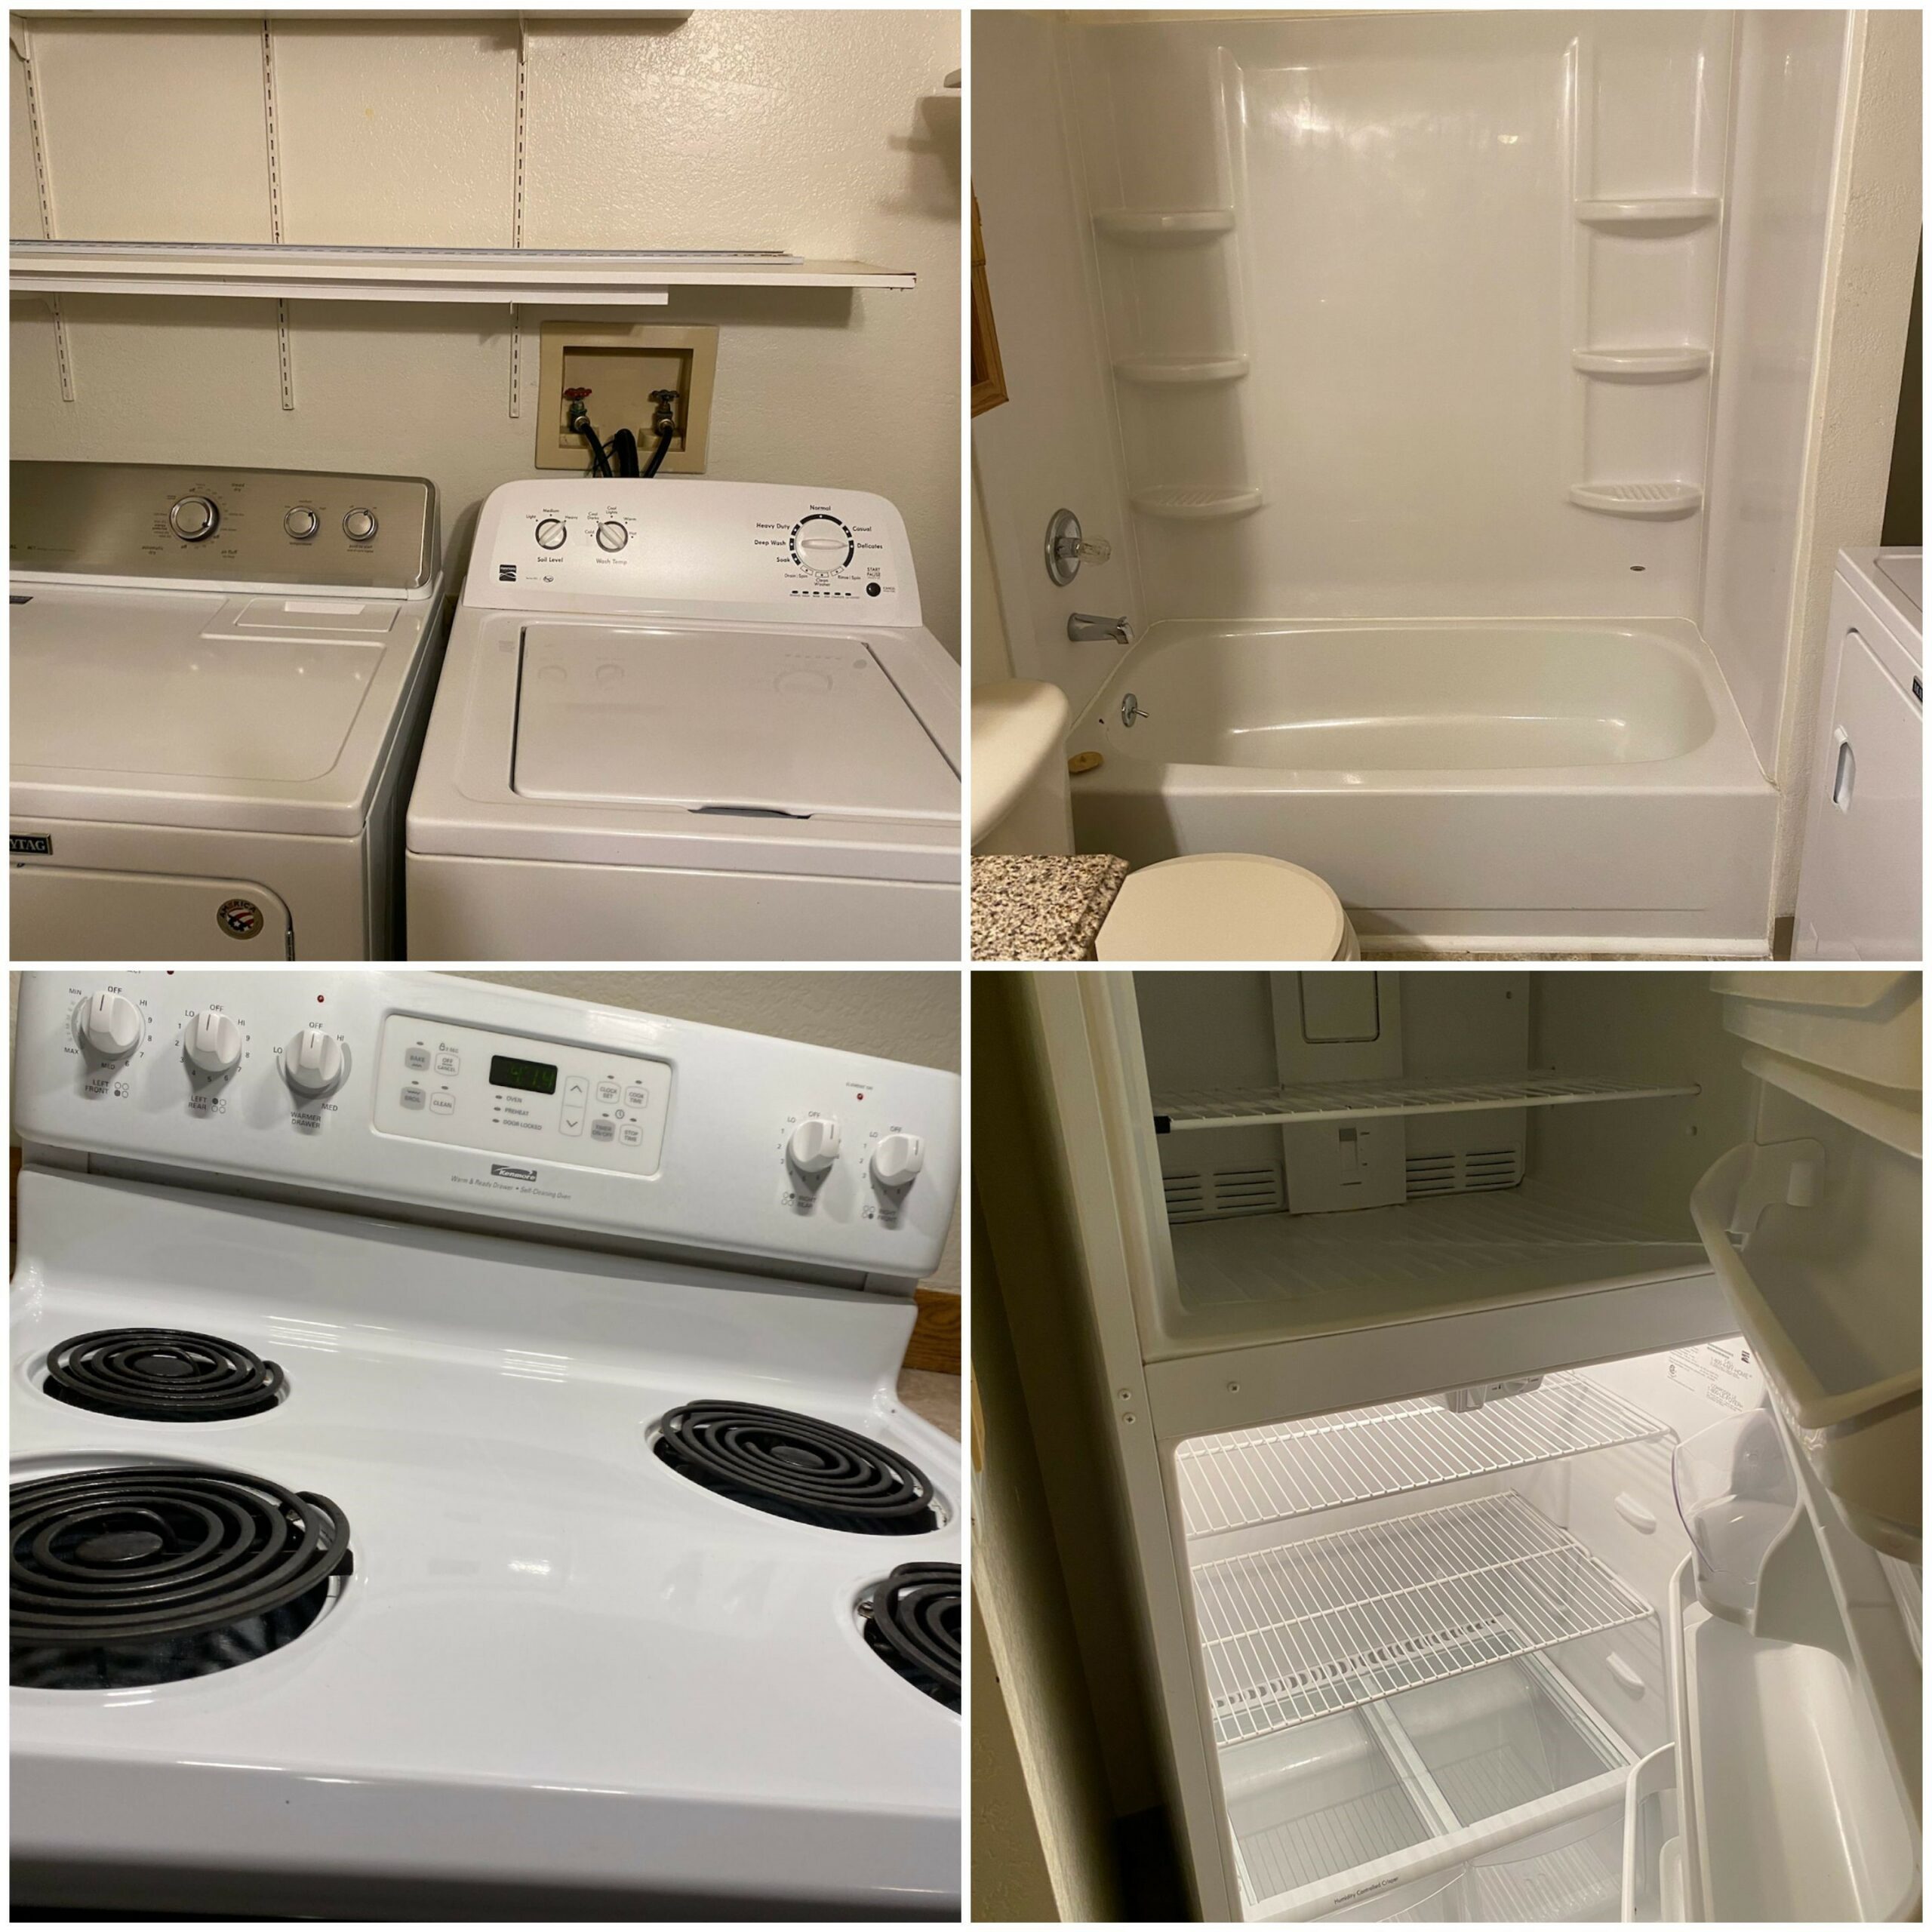 Fridge and washing machine before and after cleaning